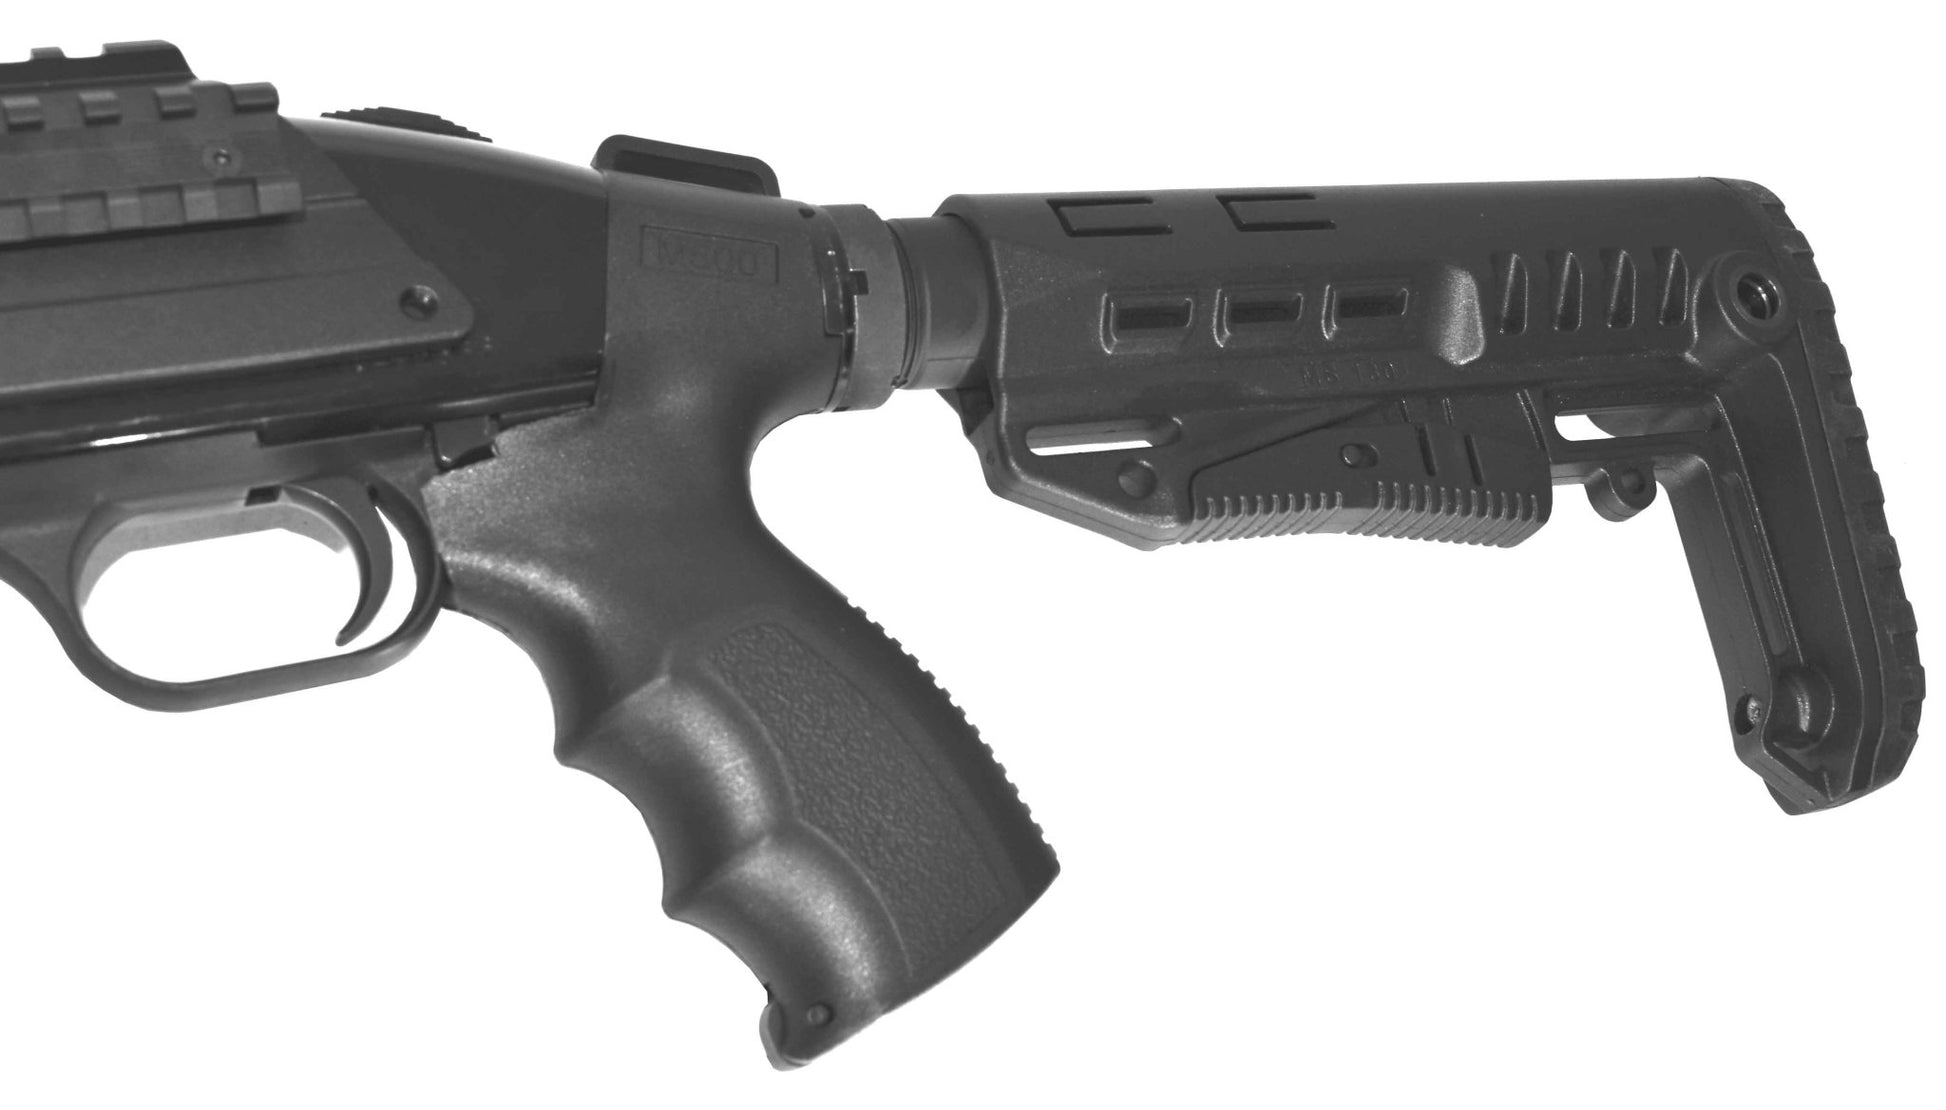 Tactical Insane Stock Compatible With Mossberg 500 12 Gauge Pump. - TRINITY SUPPLY INC